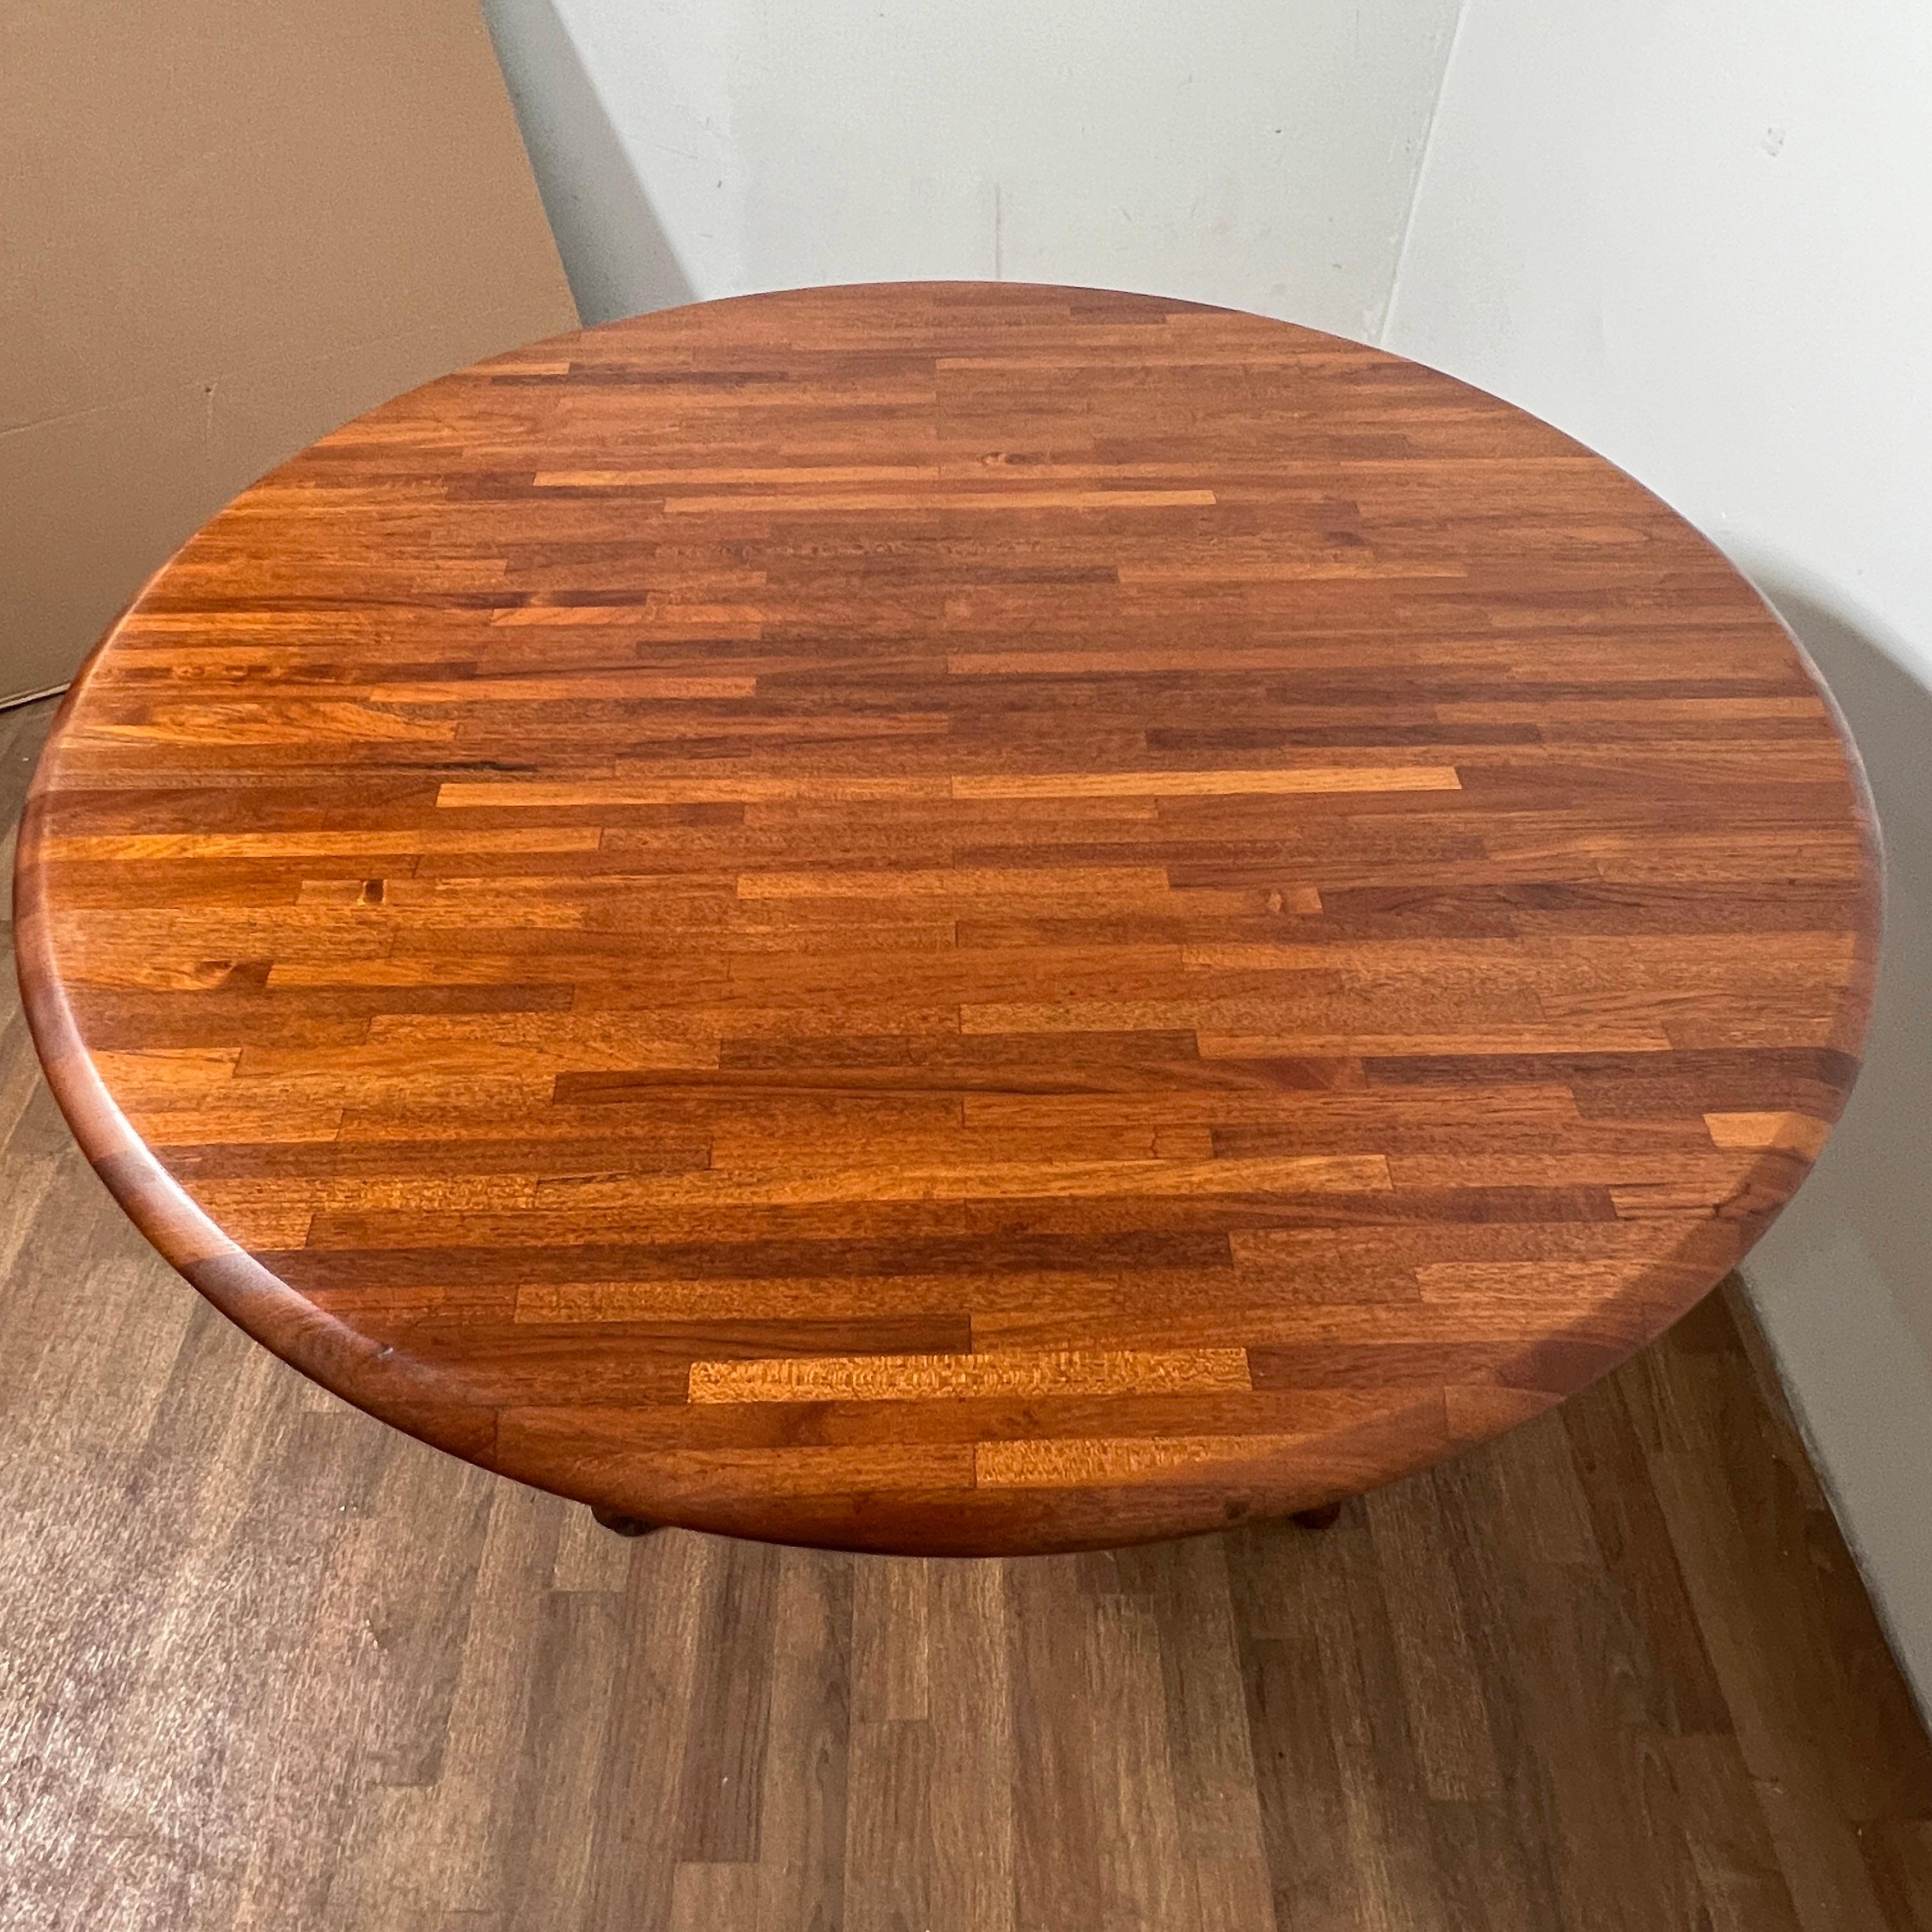 Danish Modern Staved Teak Dining Table Circa 1970s For Sale 2